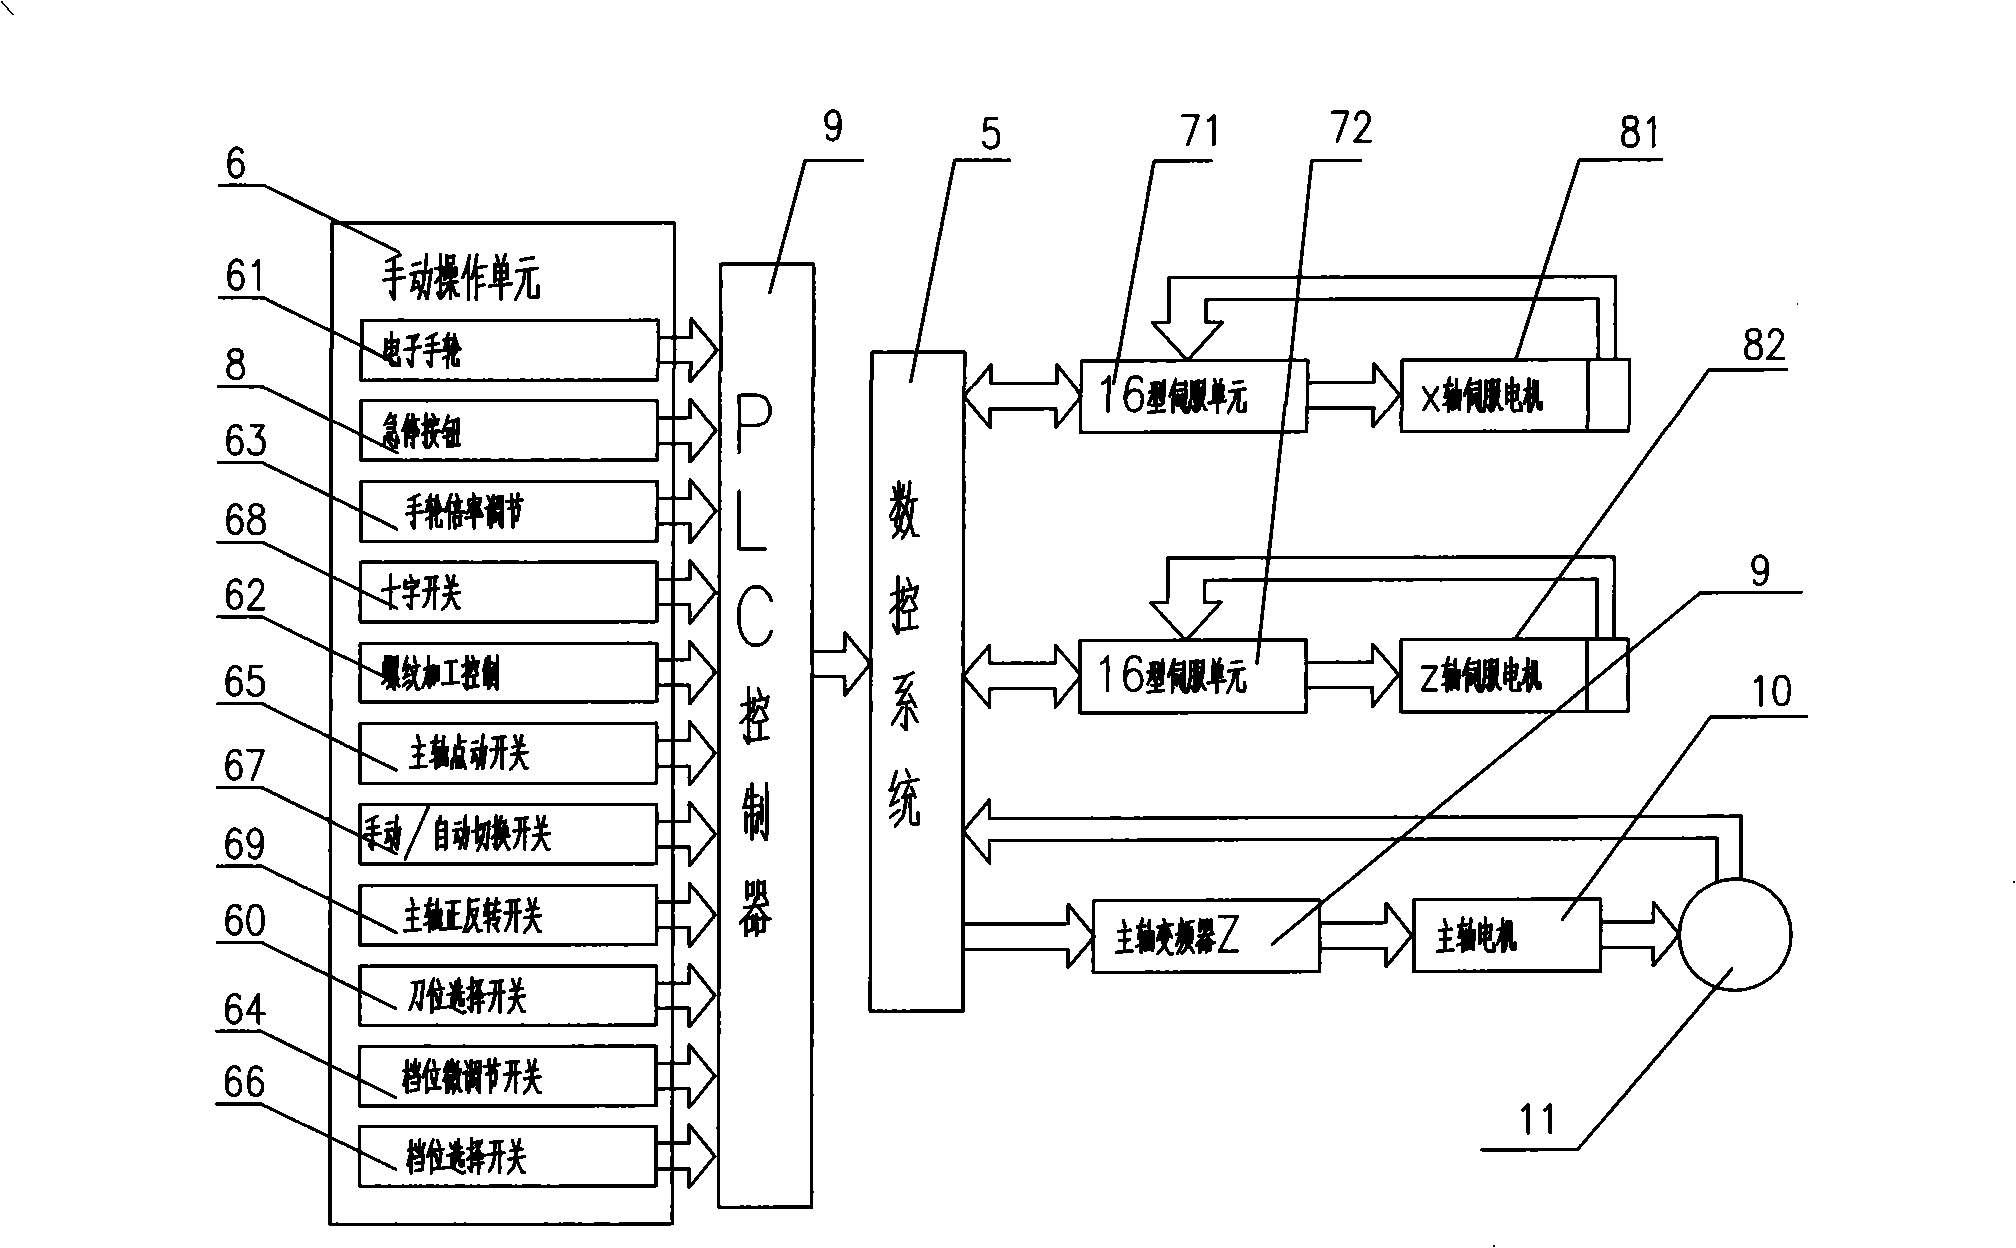 Digital-control and general lathe